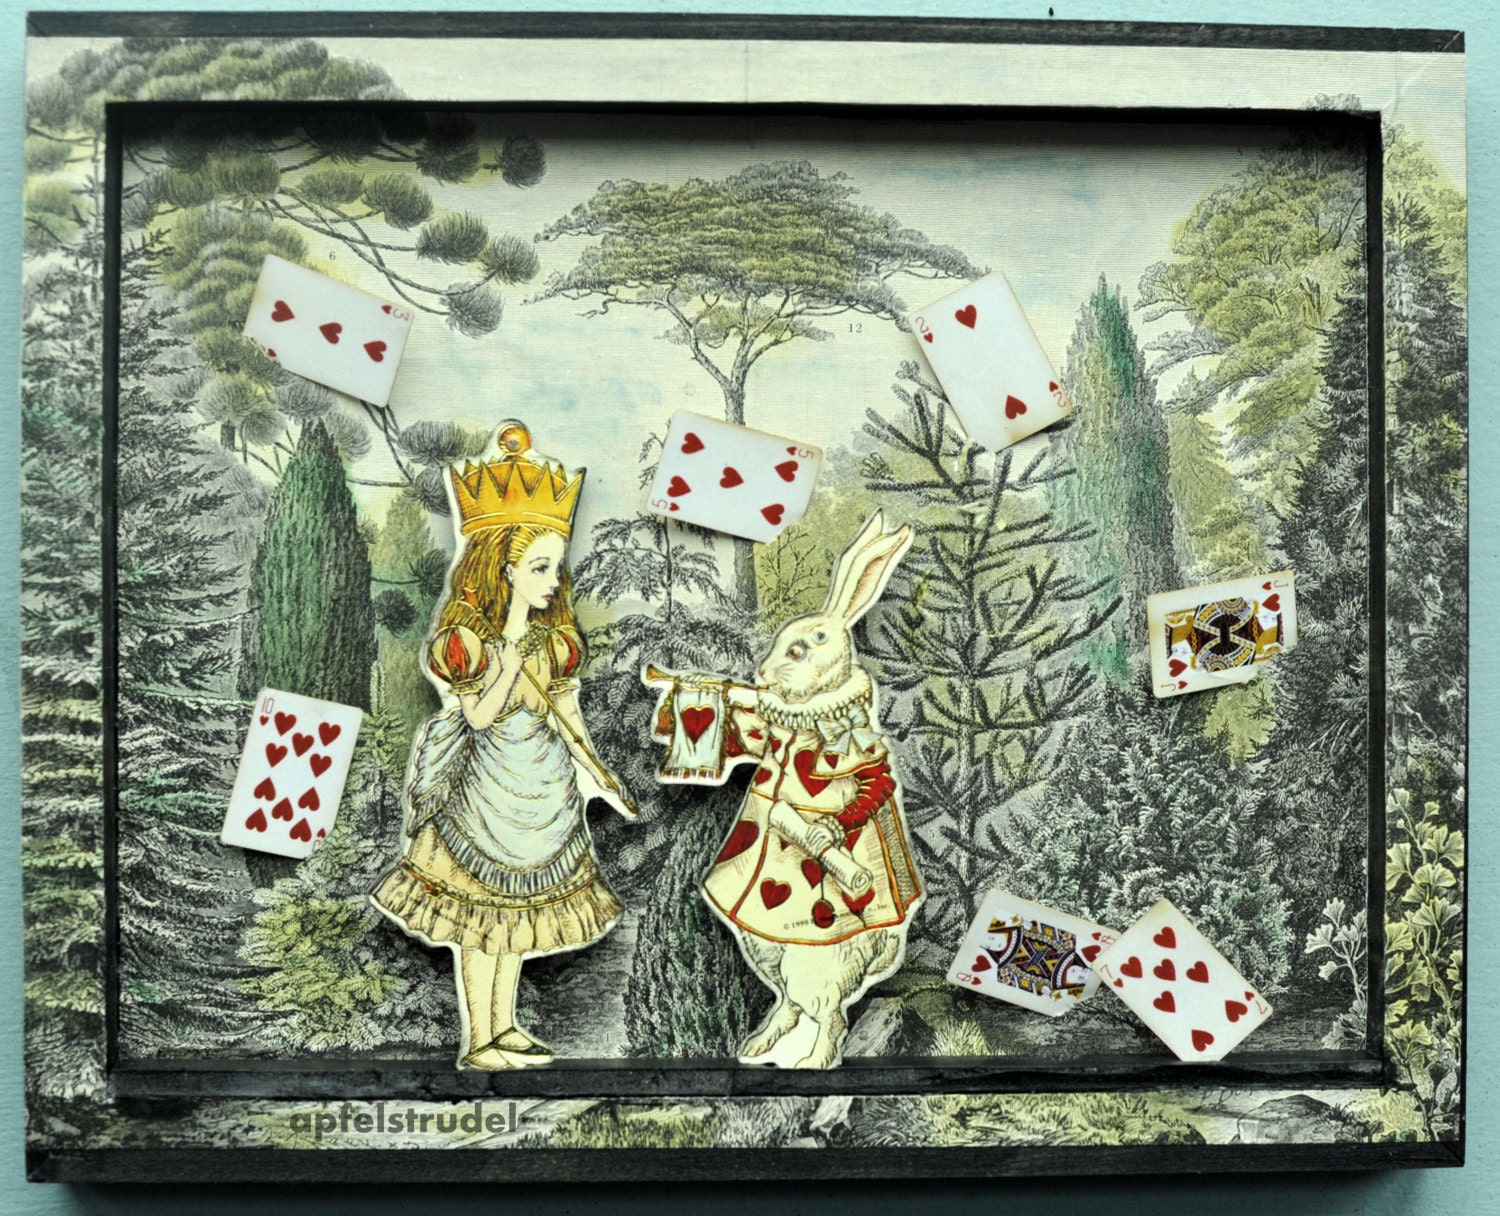 3D Alice in Wonderland Tableau Collage Art. Recycled